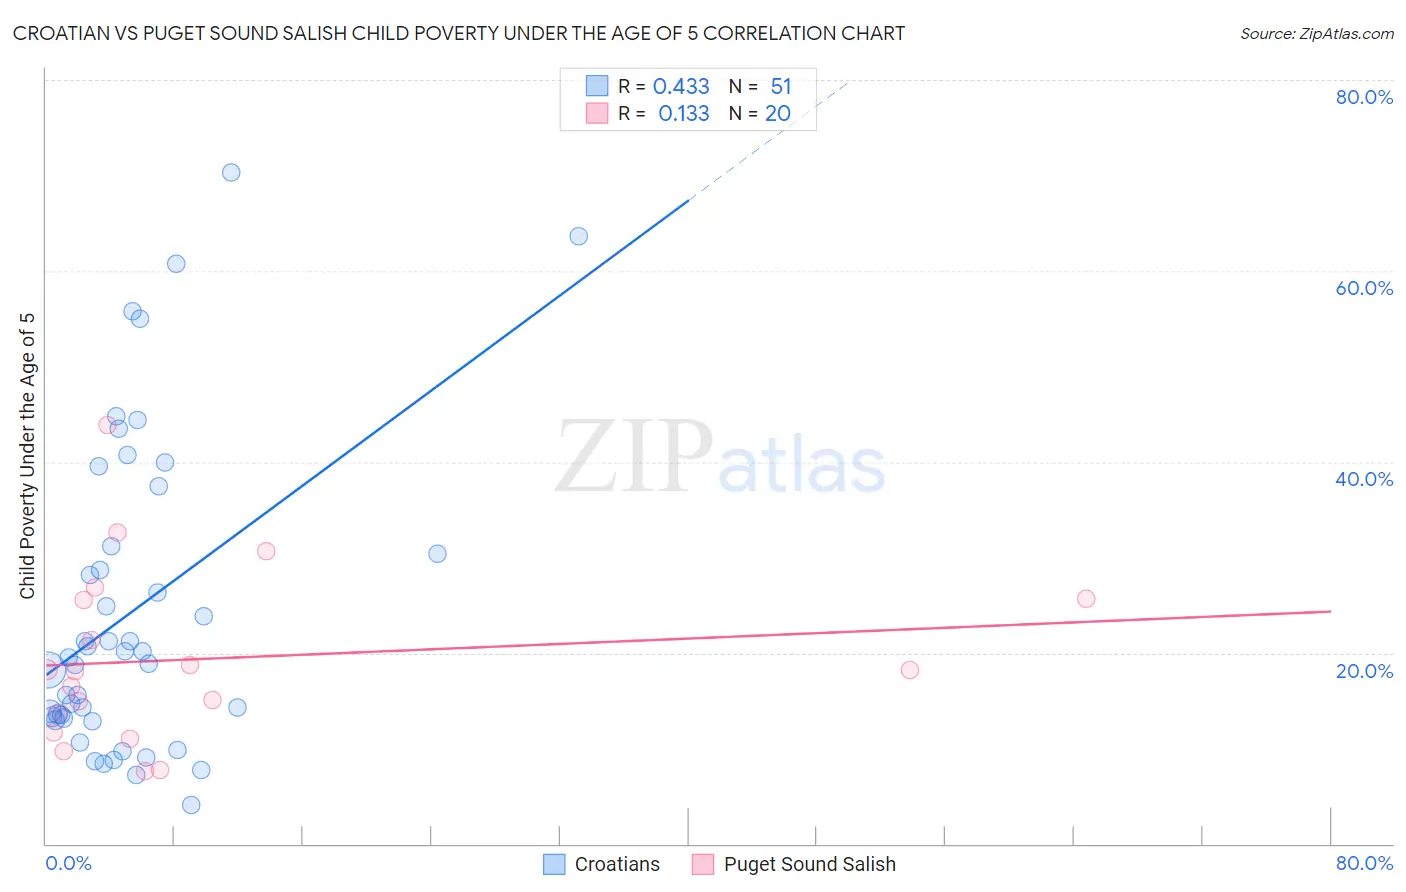 Croatian vs Puget Sound Salish Child Poverty Under the Age of 5